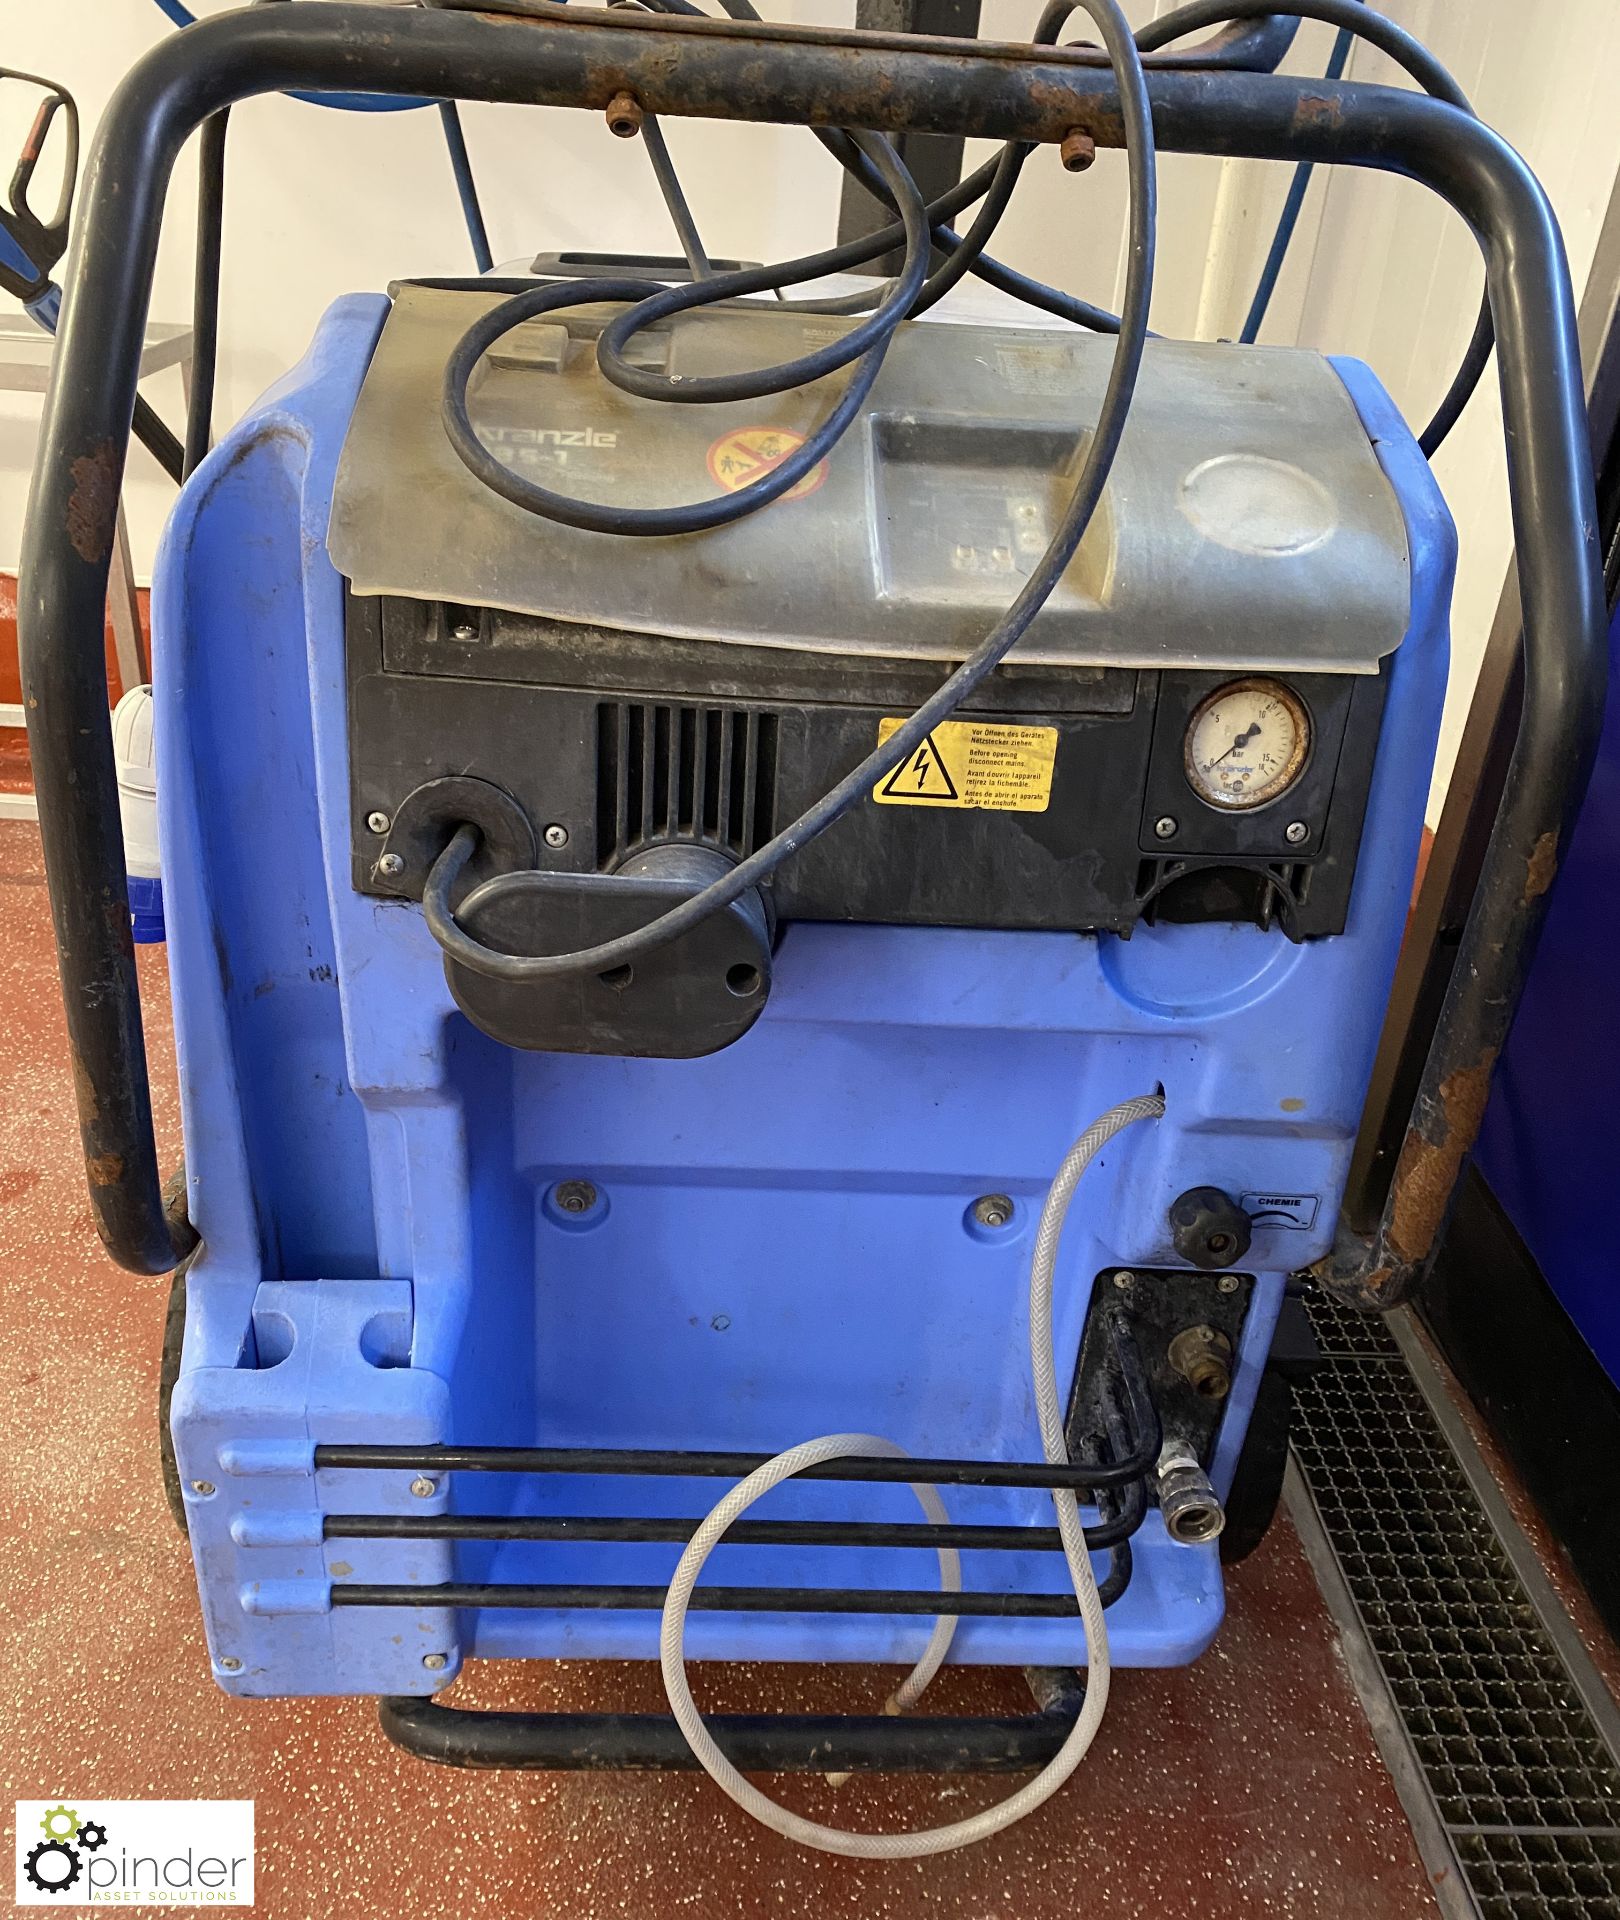 Kranzle 635-1 Steam Cleaner, no lance or hose (Lift Out Fee: £20 plus VAT) - Image 6 of 7